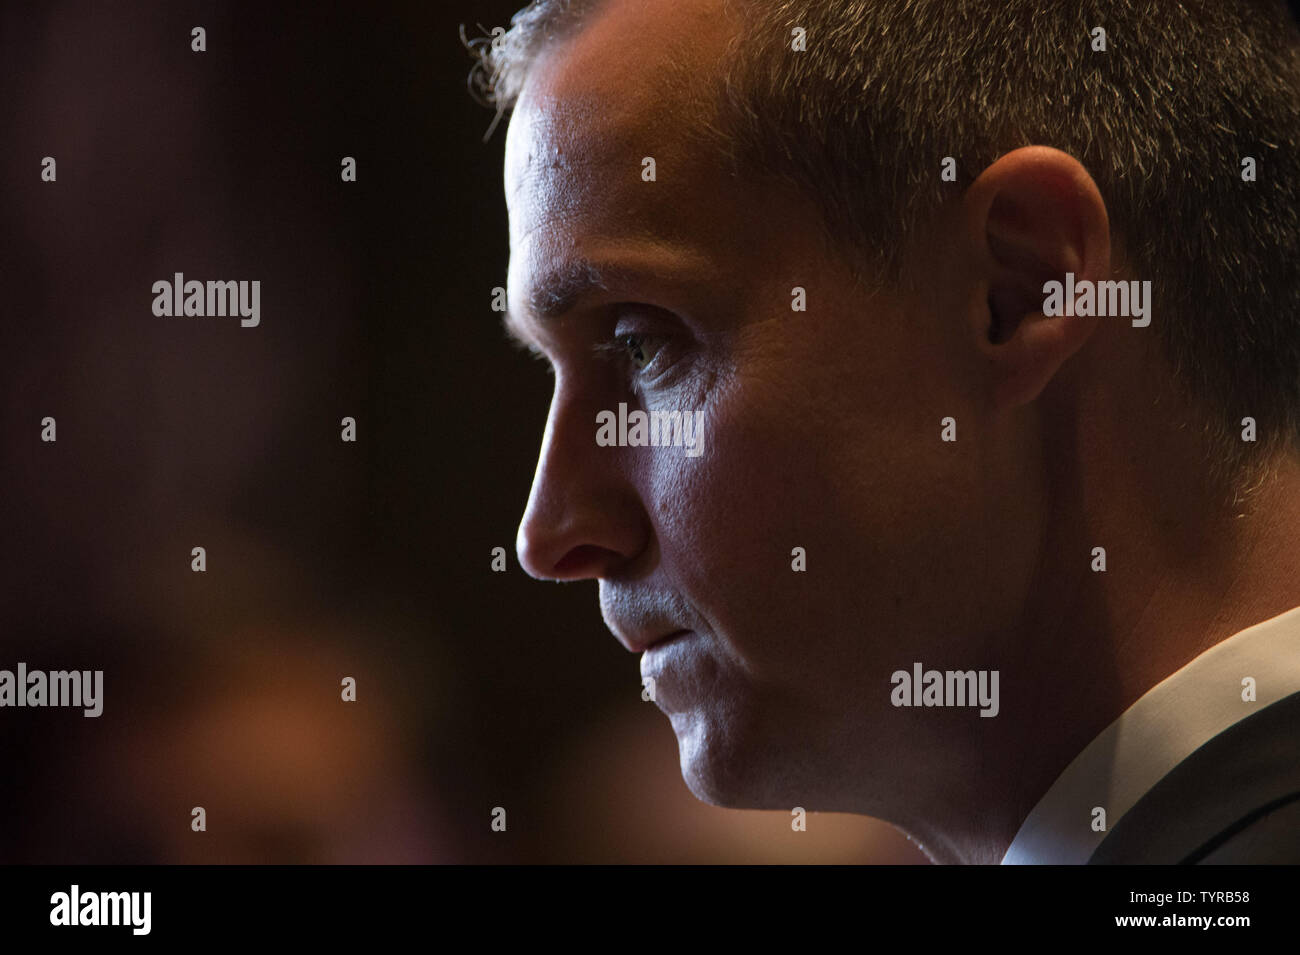 Trump campaign advisor Corey Lewandowski speaks to reporters before Republican candidate for President Donald Trump speaks after the Connecticut, Delaware, Maryland, Pennsylvania, and Rhode Island primaries at Trump Tower on April 26, 2016 in New York City.      Photo by Bryan R. Smith/UPI Stock Photo